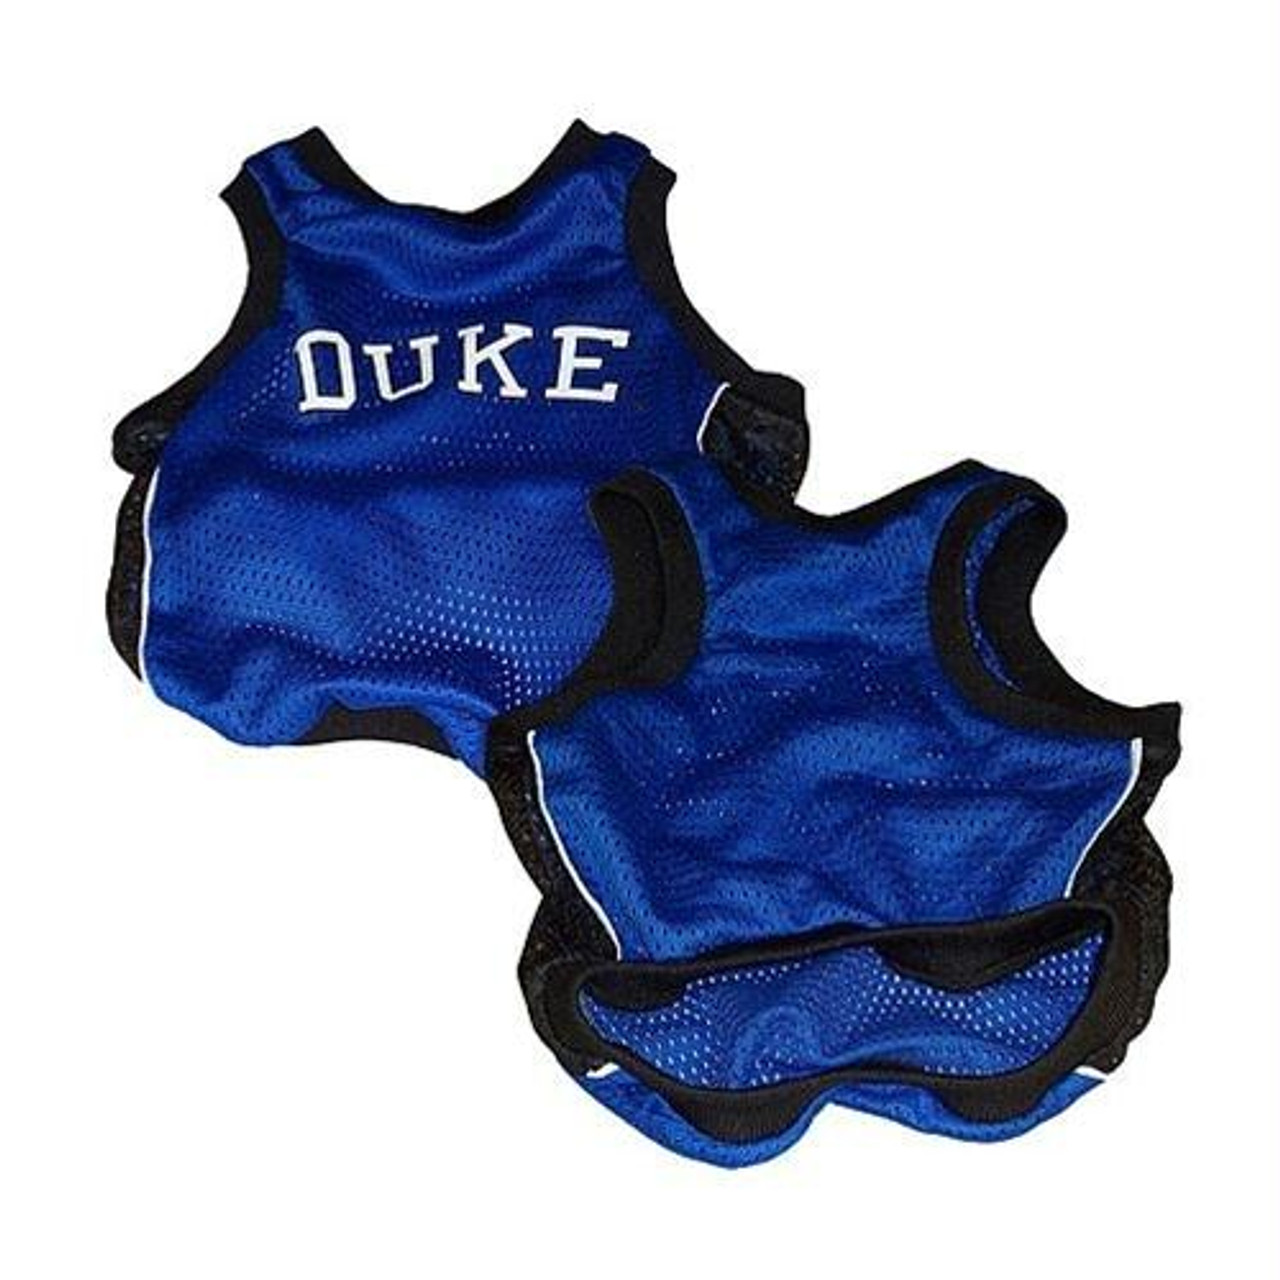 Pets First NCAA Mesh Basketball Jersey for Dogs, X-Small, Duke